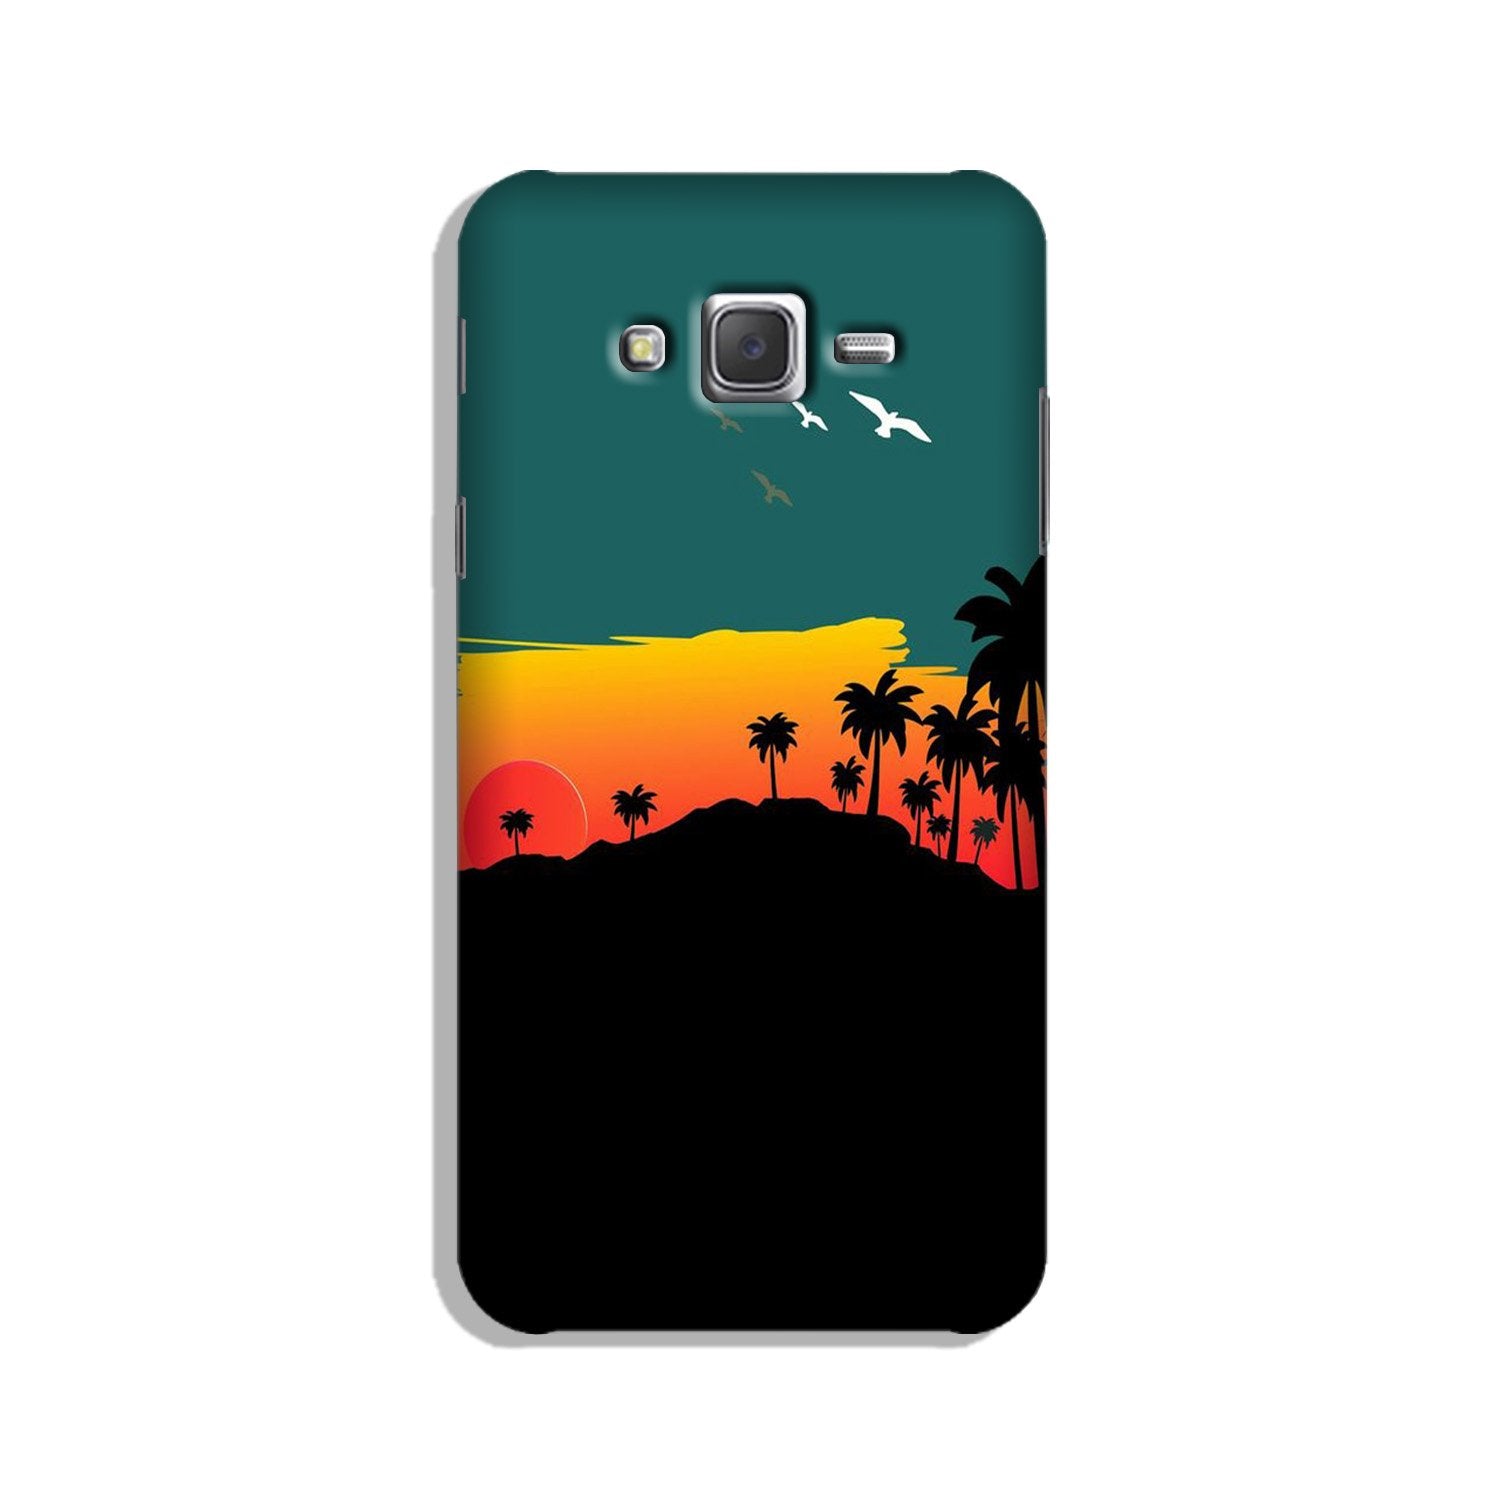 Sky Trees Case for Galaxy J7 Nxt (Design - 191)